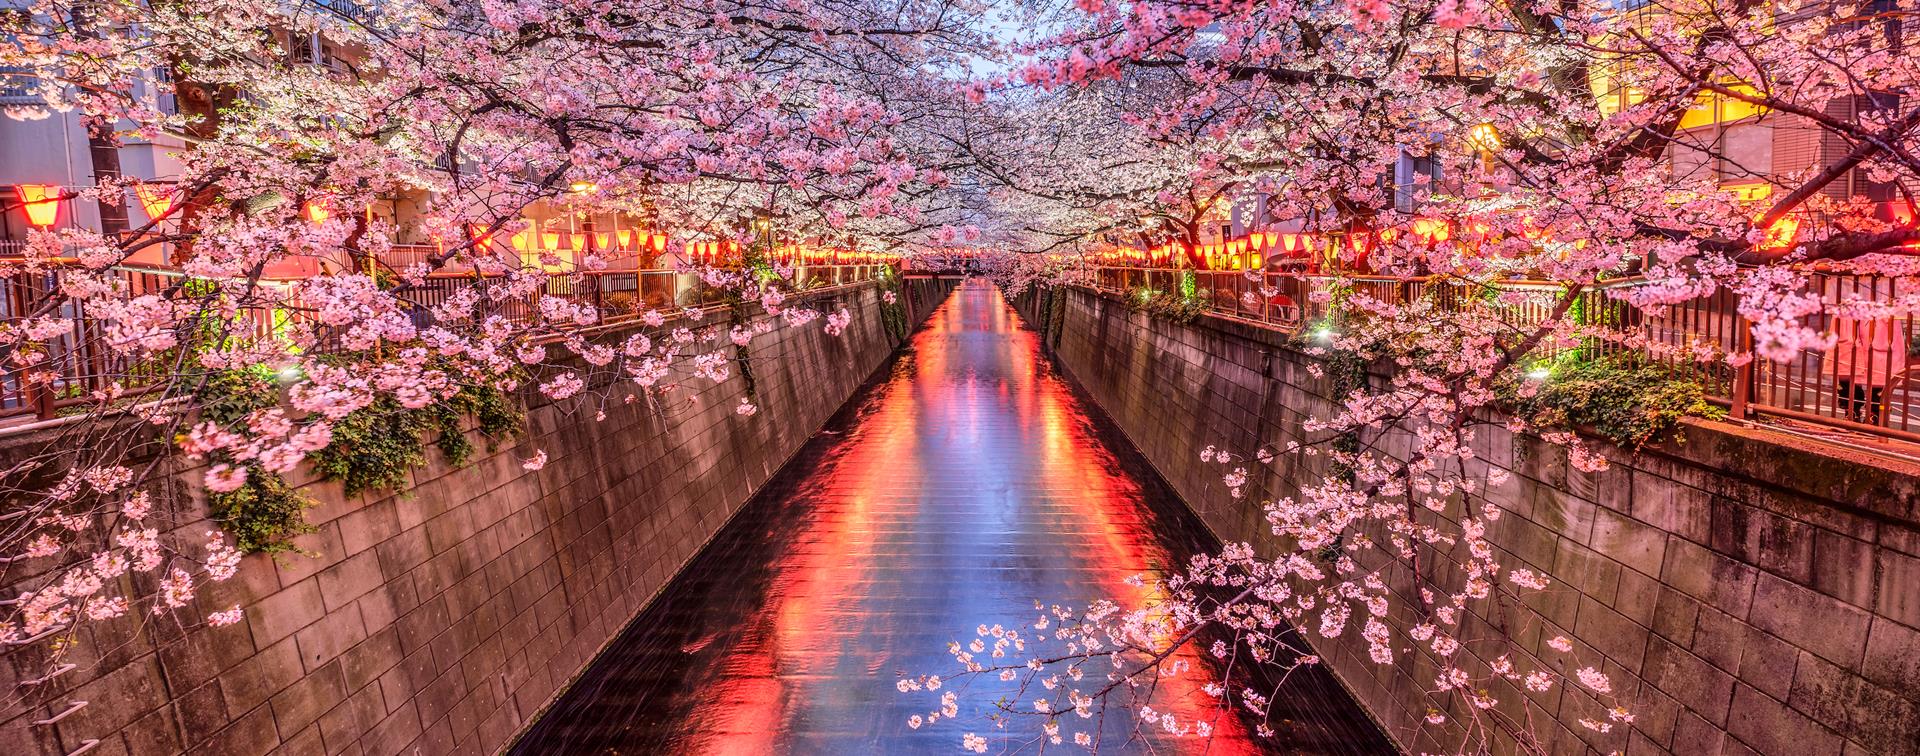 Picture of cherry blossoms along a river in Japan.